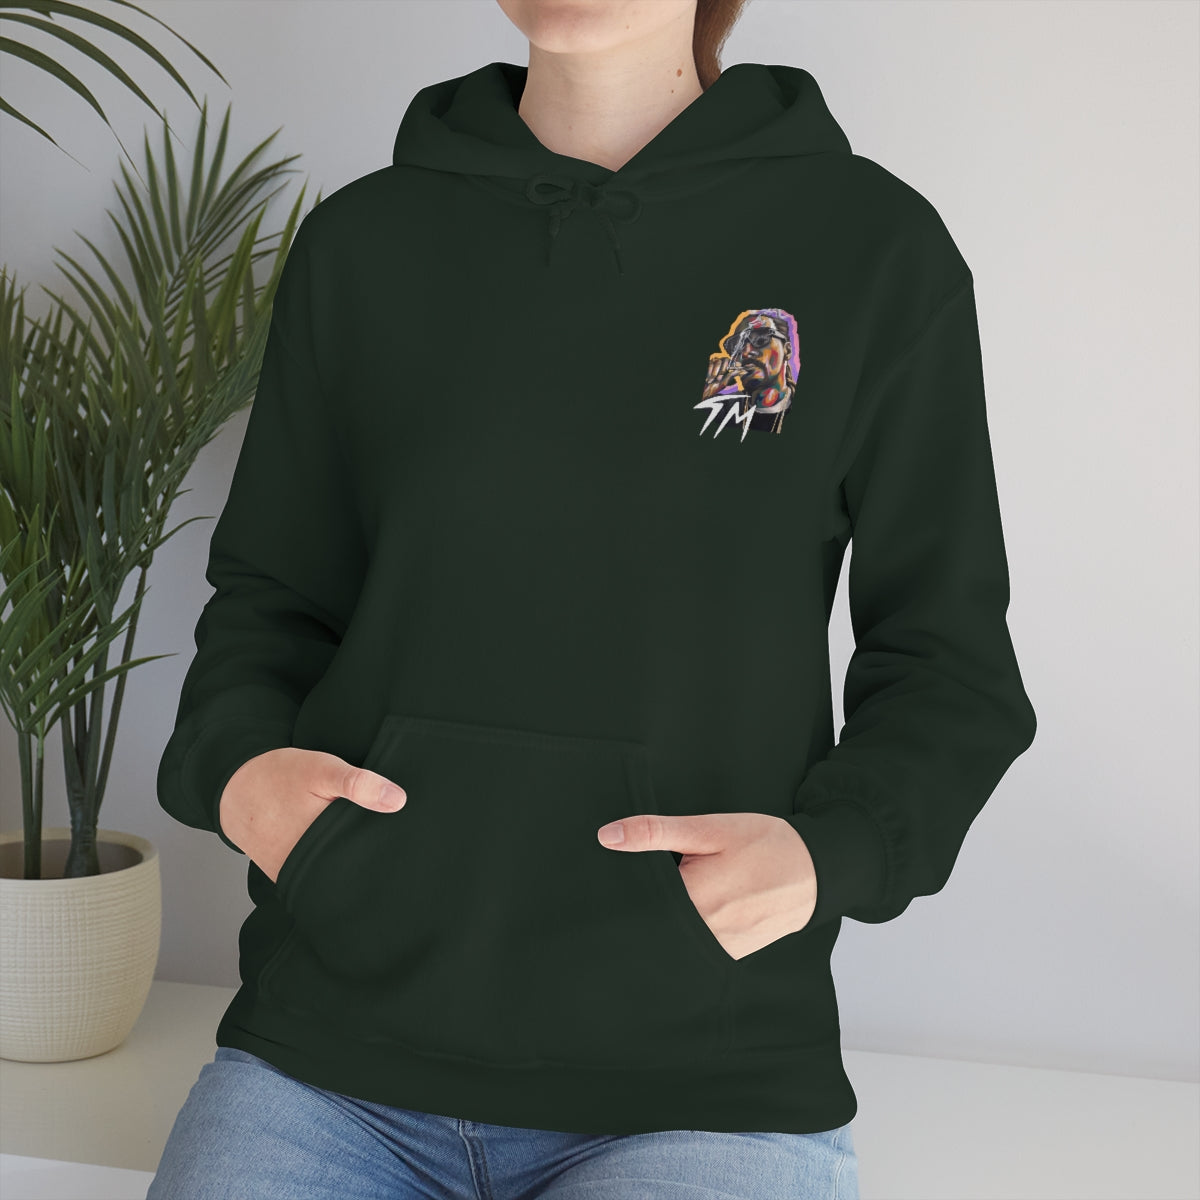 Snoop Dogg (No Weed Design) - Hoodie - Tommy Manning Art